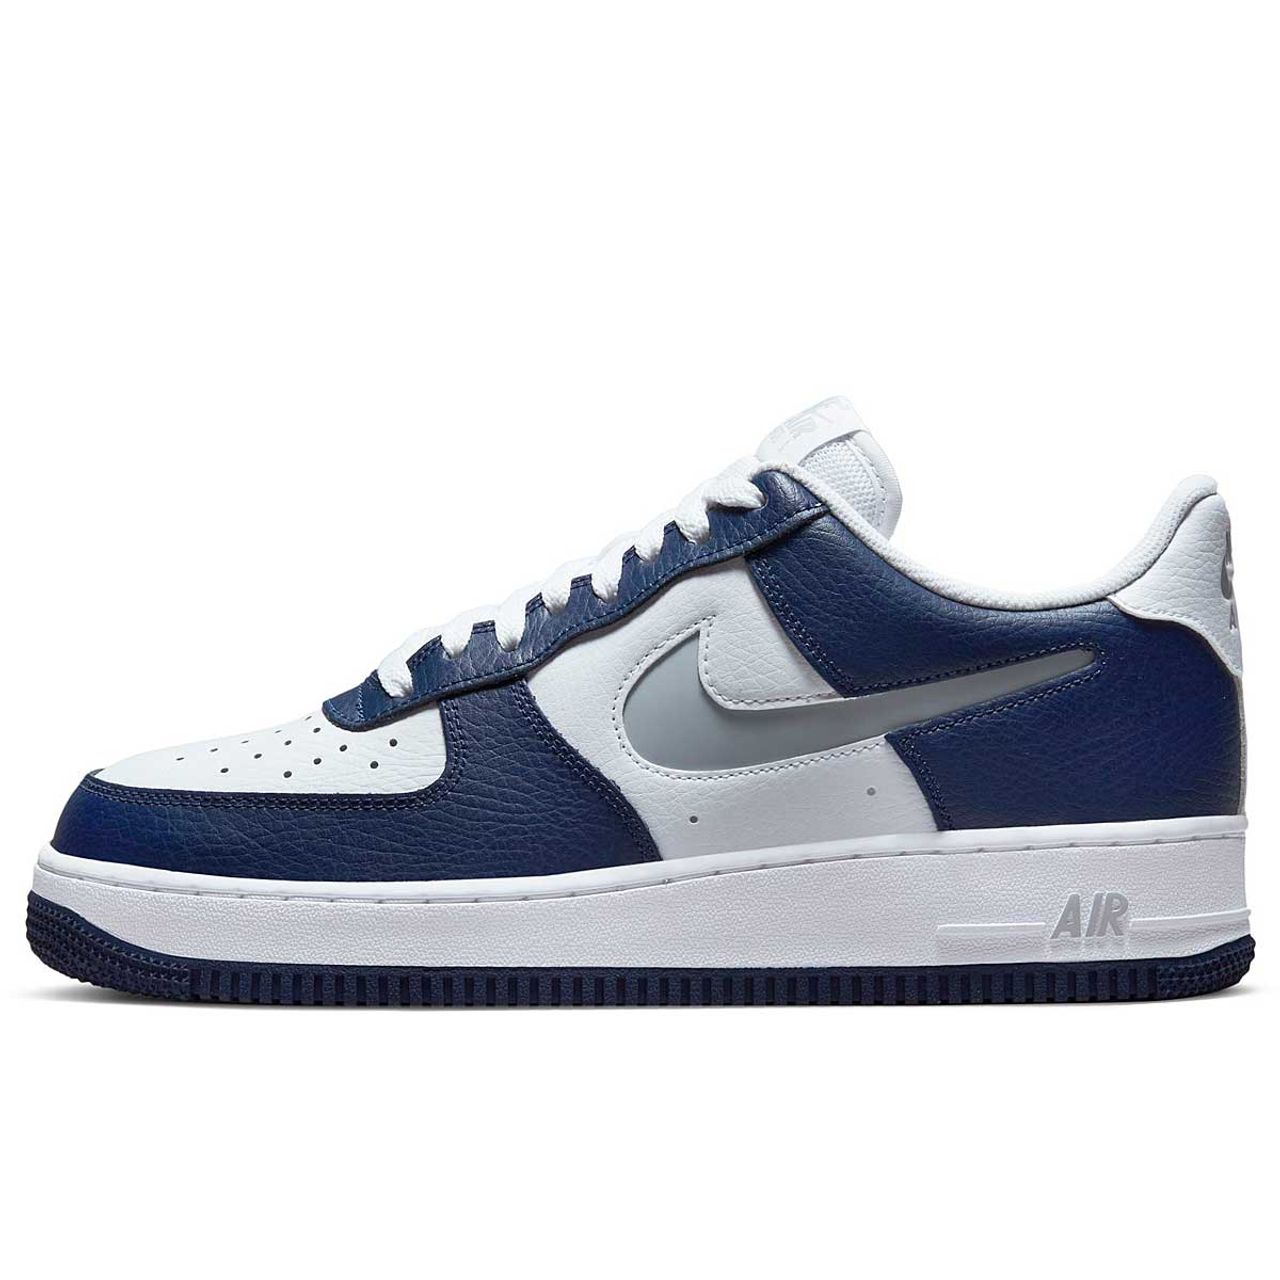 Nike Air Force 1 '07 Lv8, Midnight Navy/Wolf Grey-White